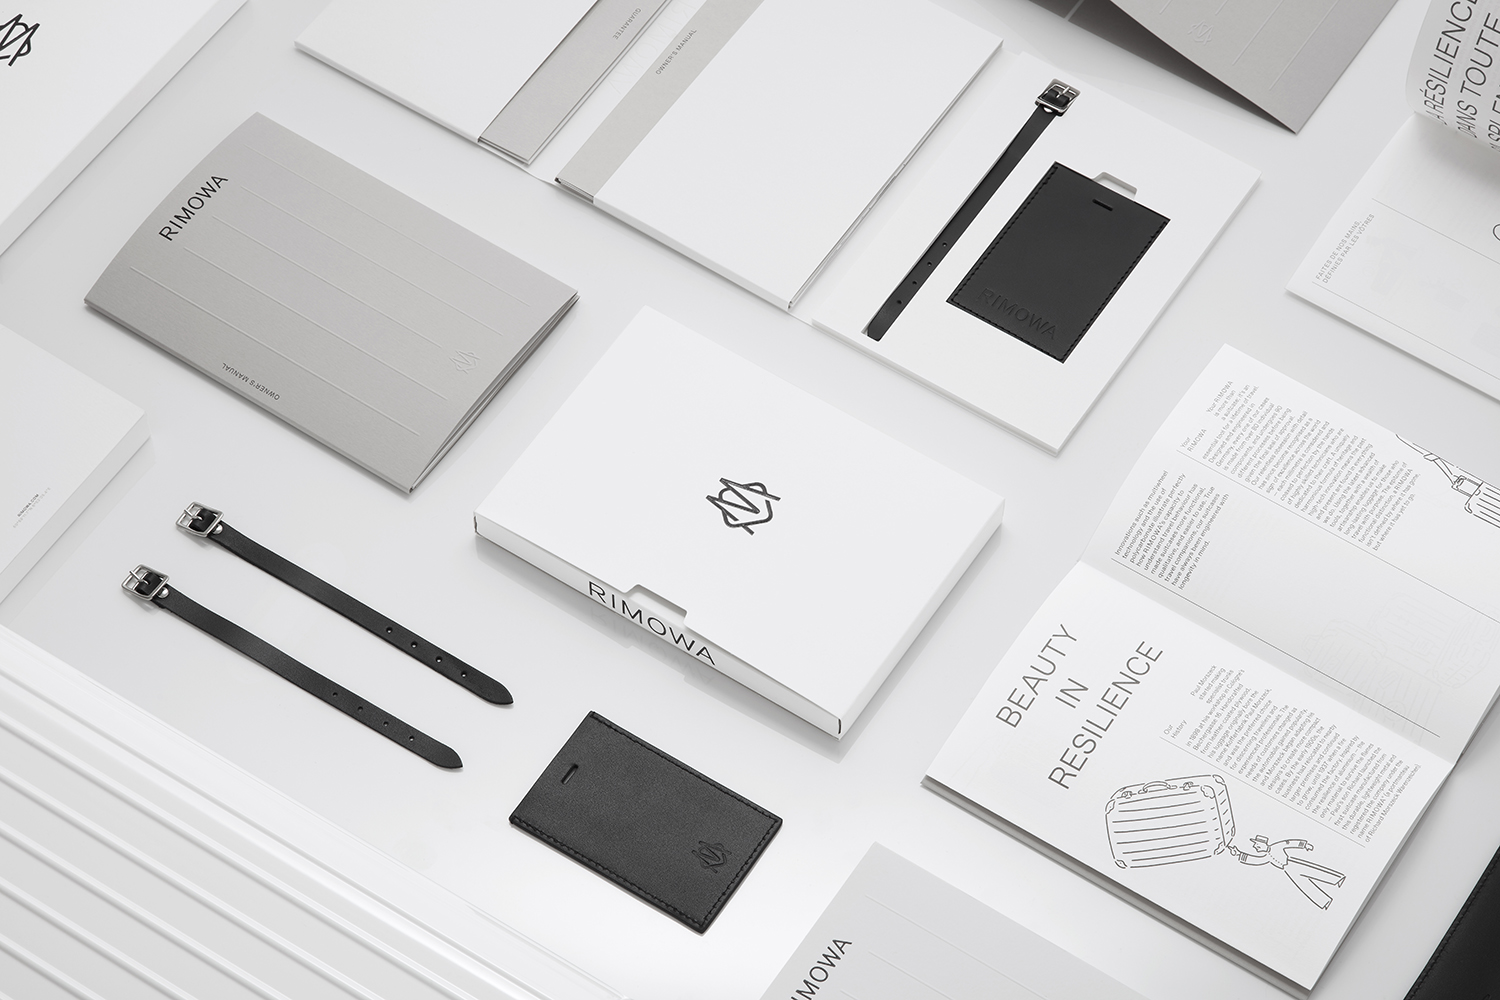 Graphic identity by Commission studio for functional luxury luggage manufacturer Rimowa